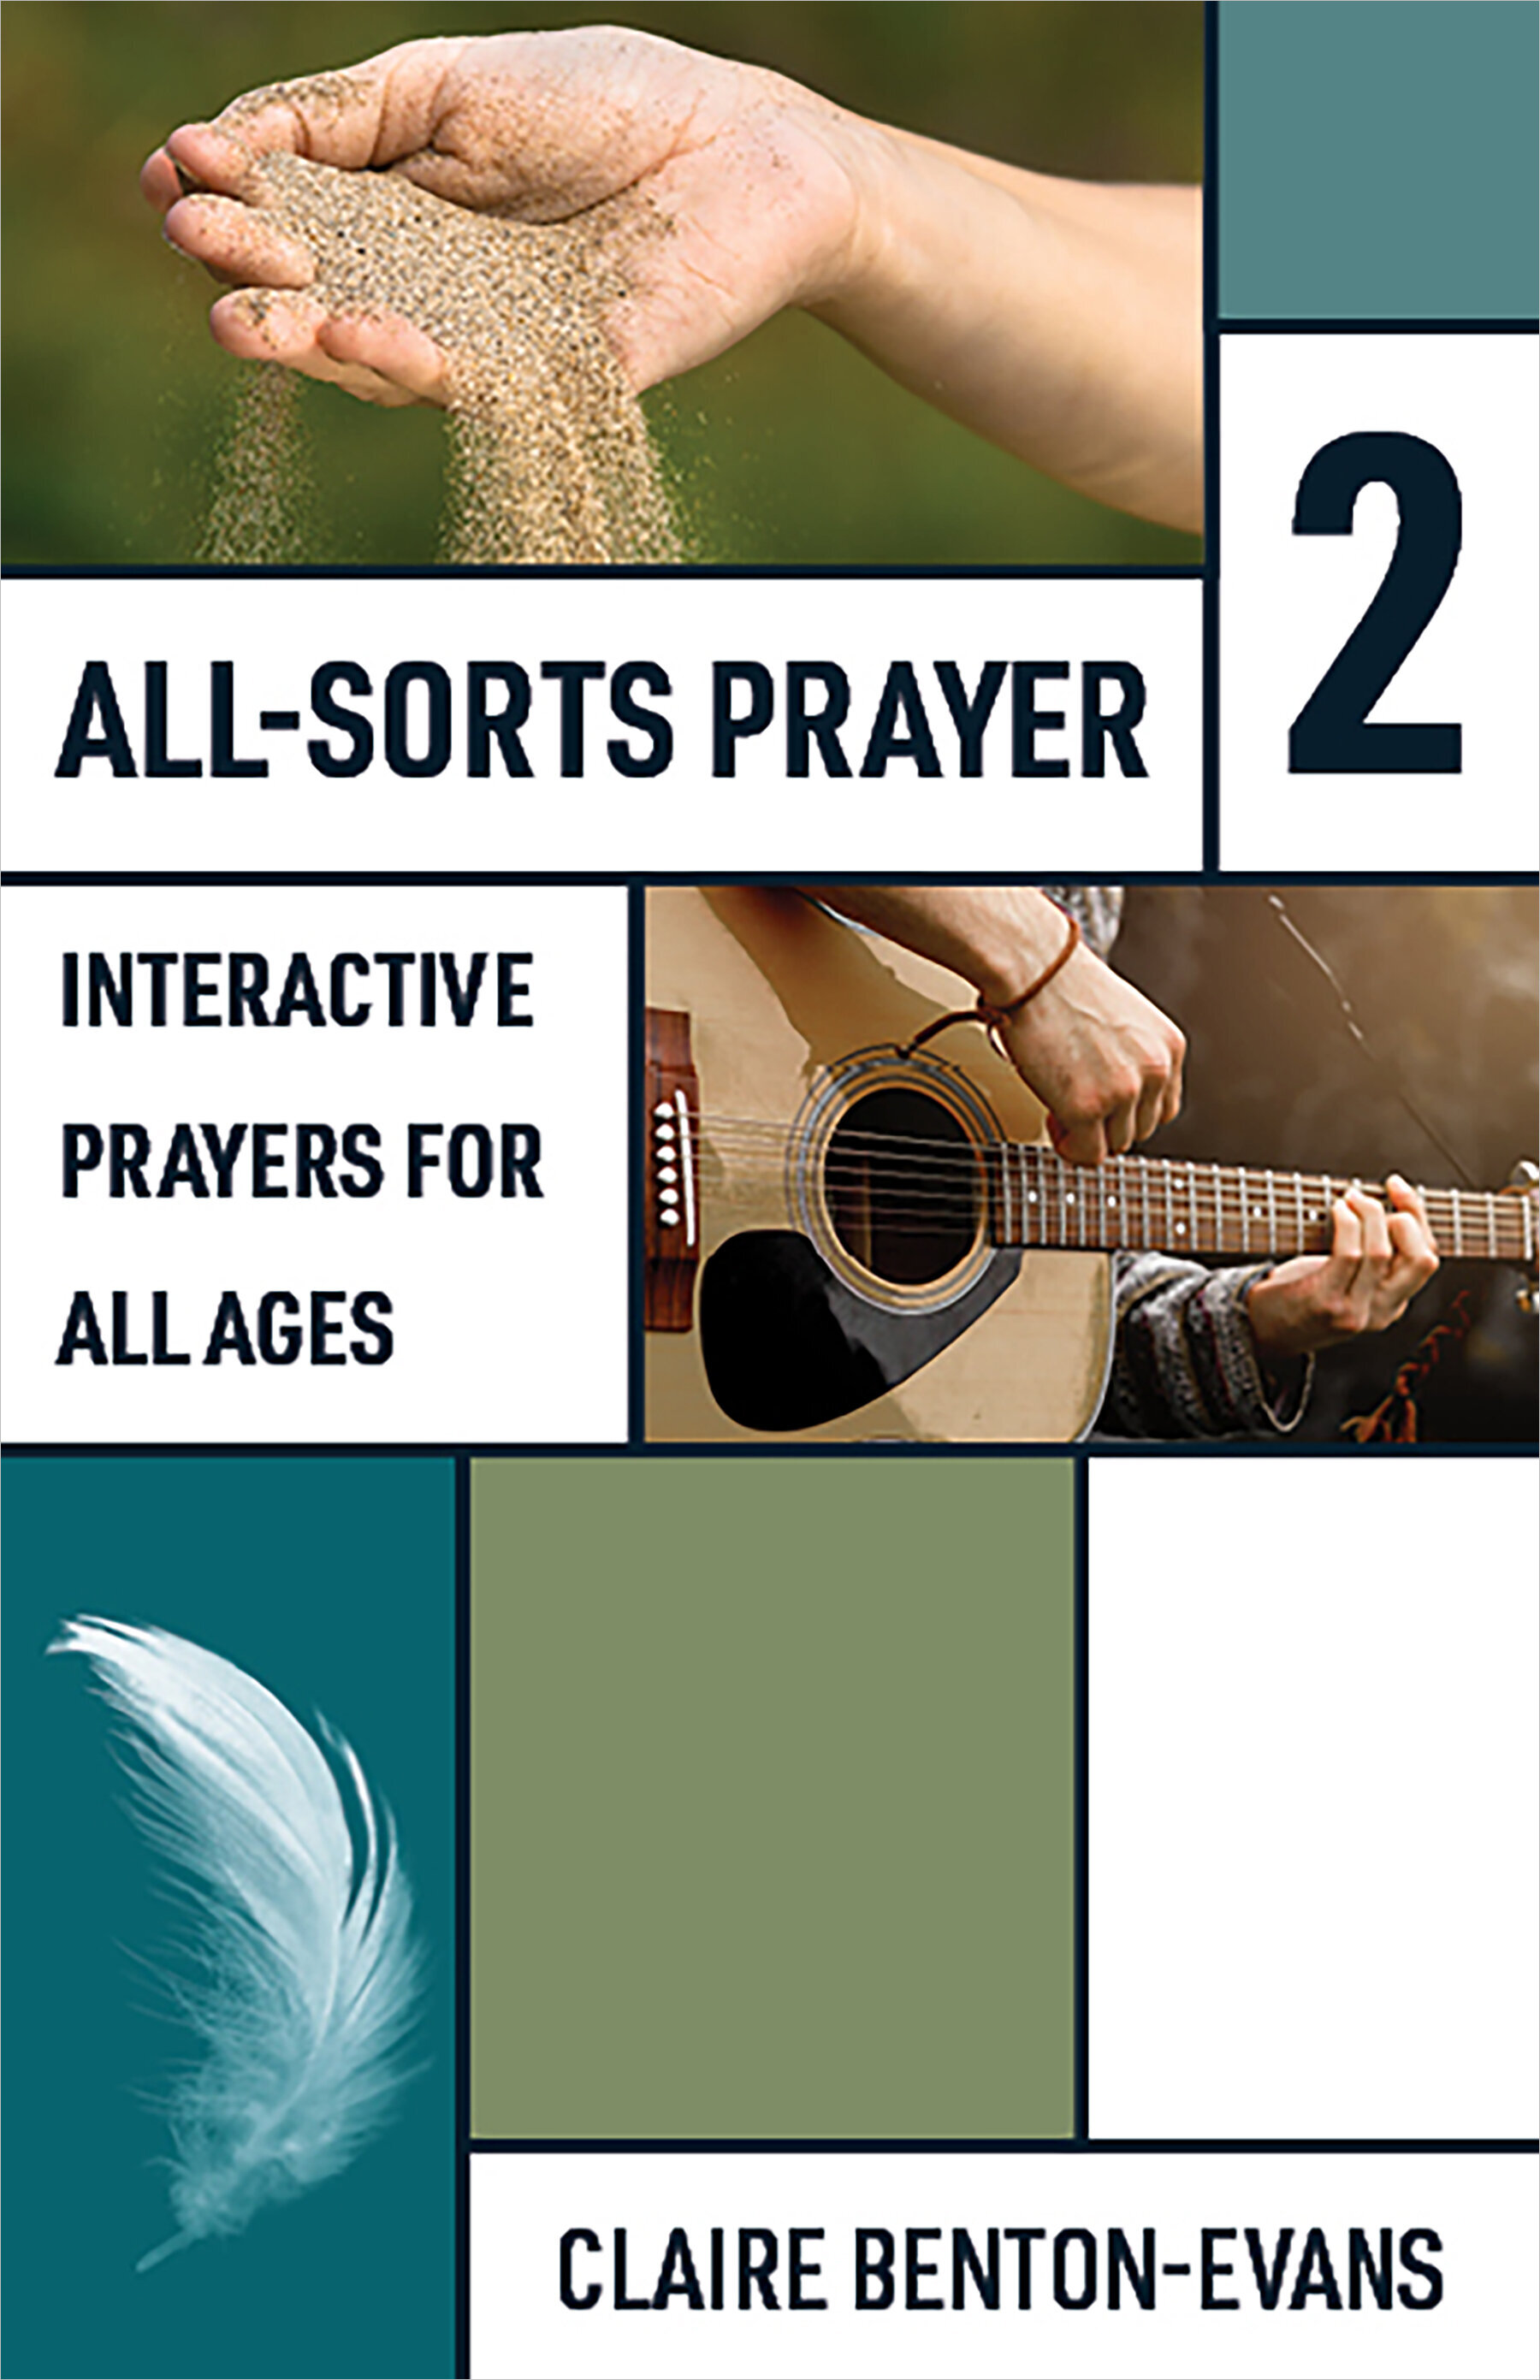 All-Sorts Prayer 2: Interactive prayers for all ages